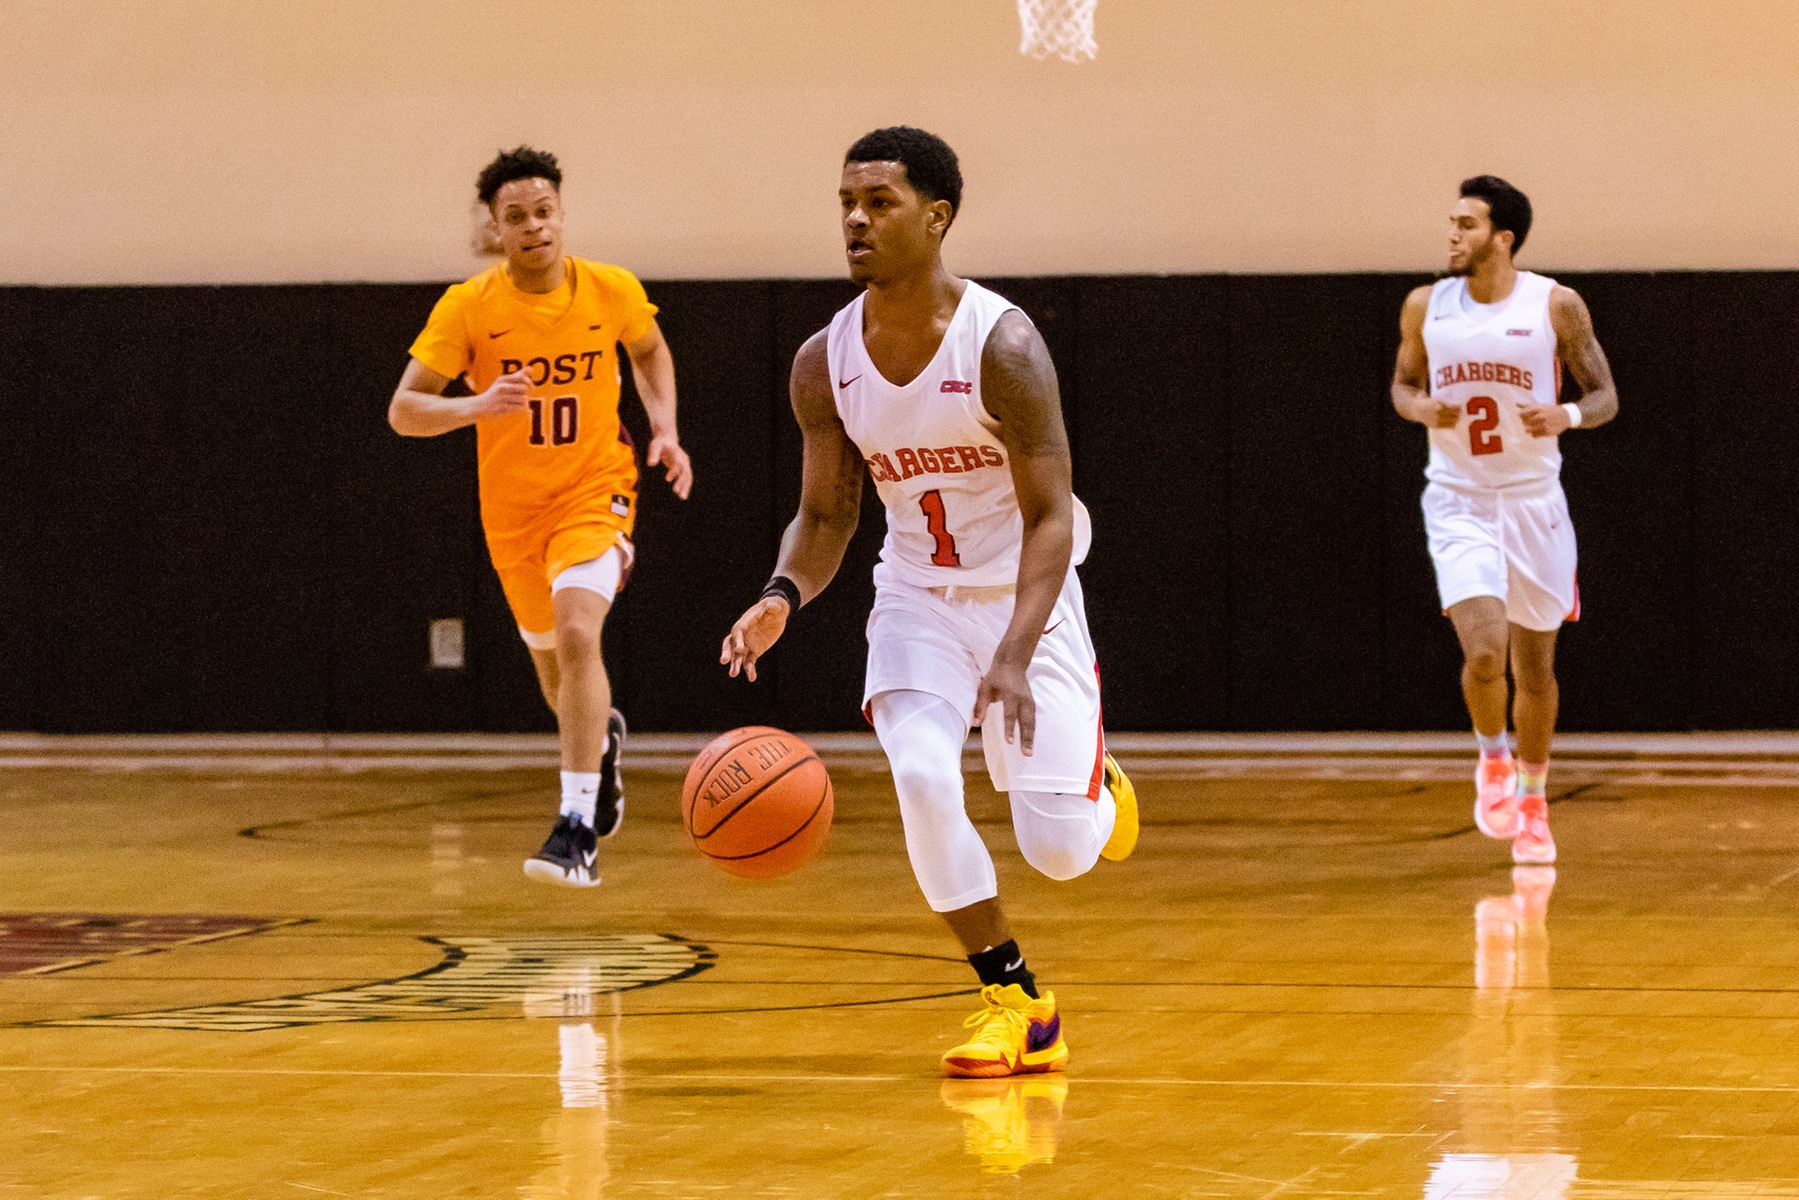 MEN'S BASKETBALL EDGED BY NEW HAVEN